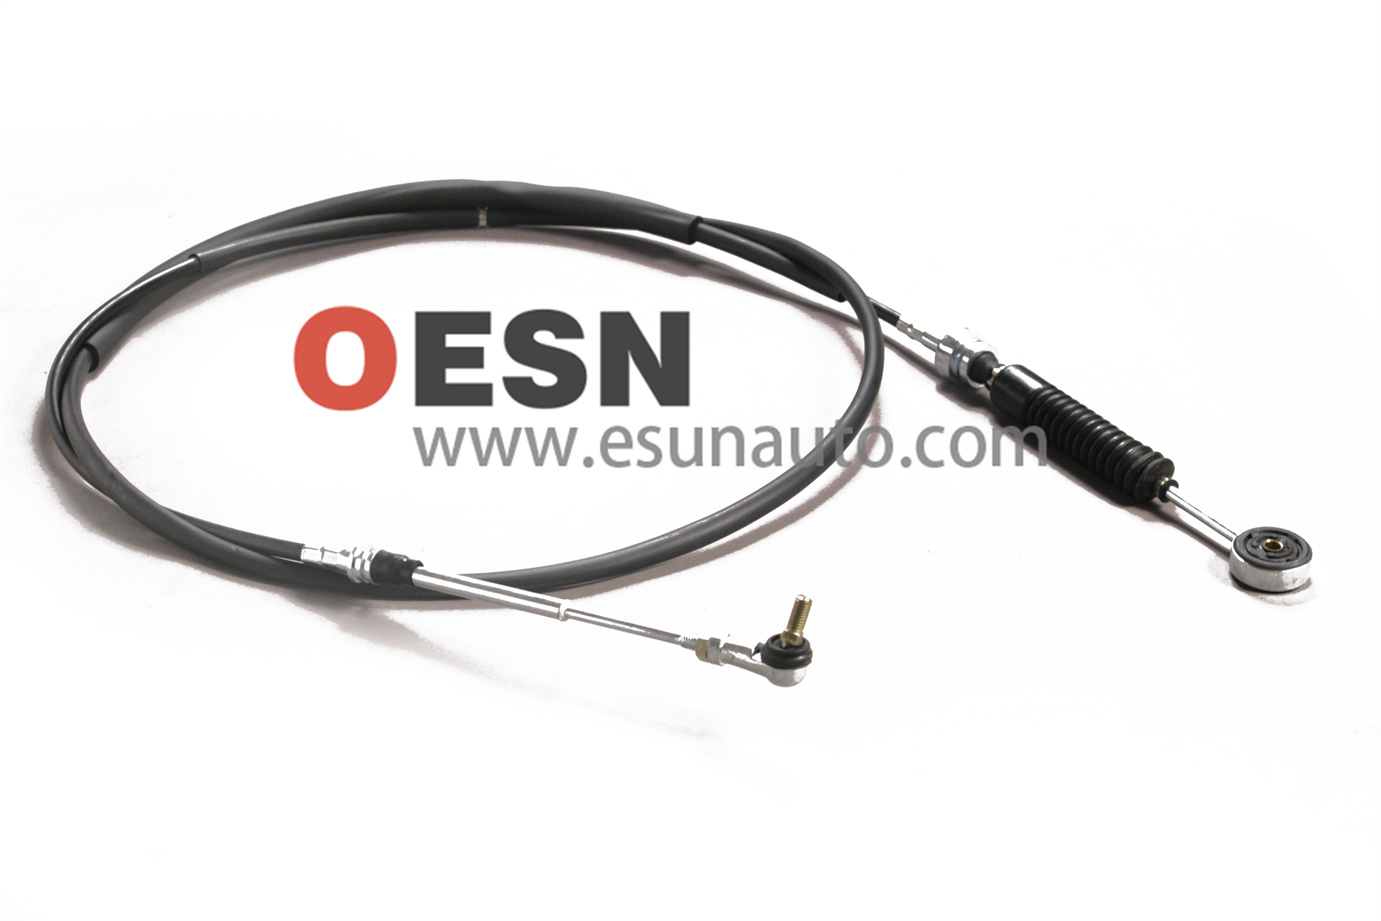 Gear shift cable  ESN70027  OEM8981468480  8892957920